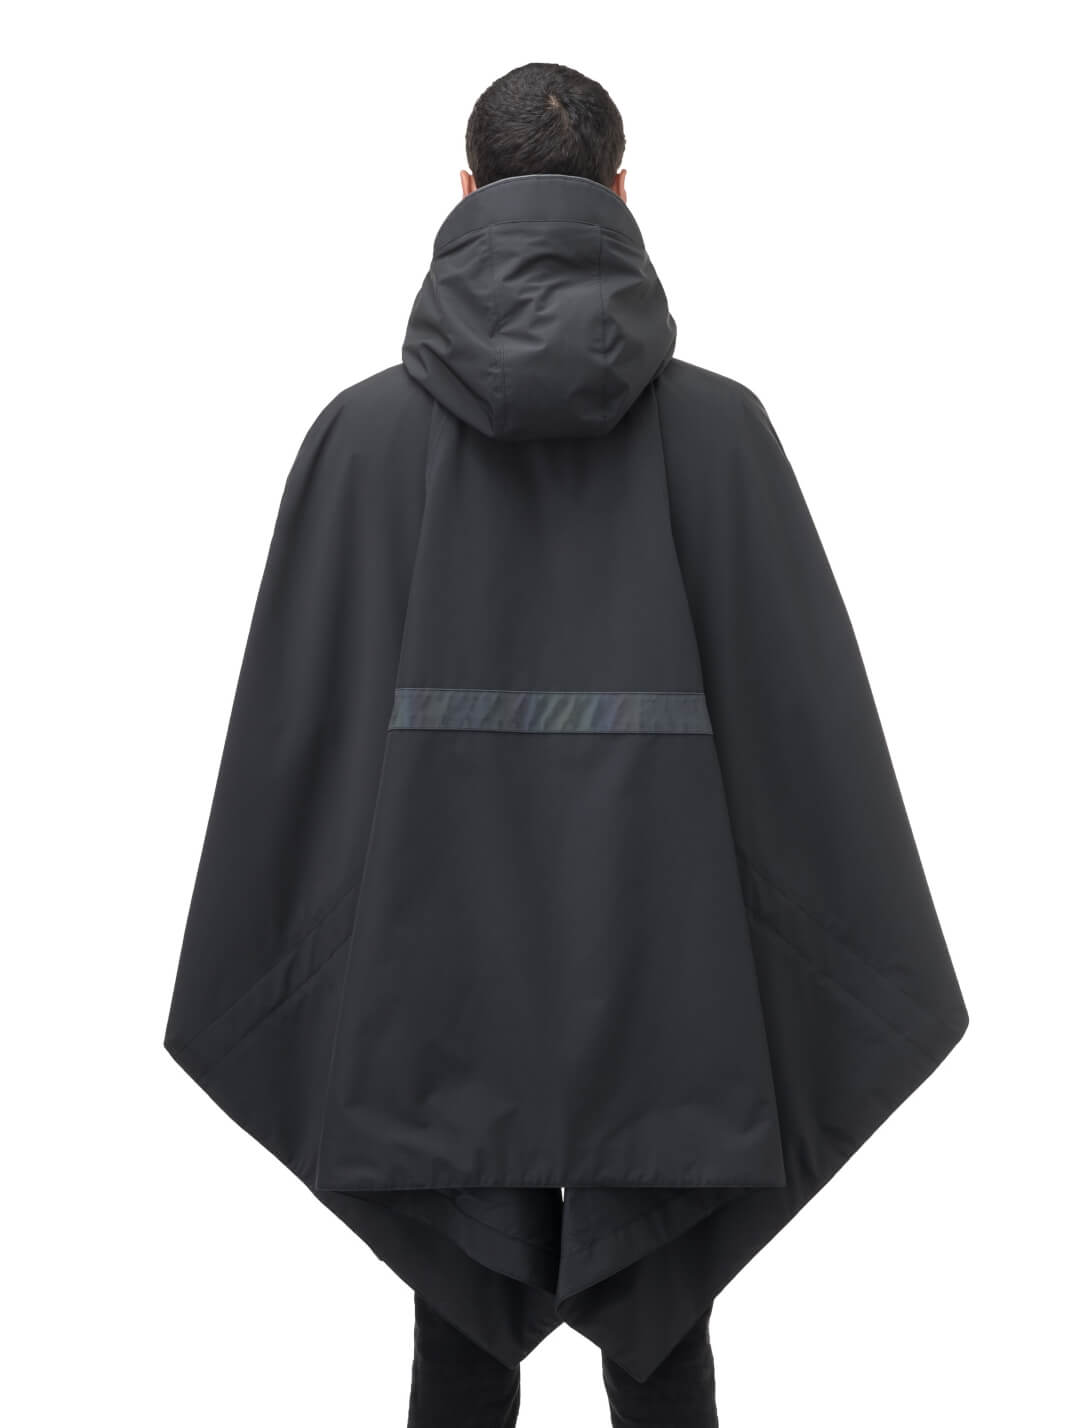 Hydra Unisex Performance Poncho in thigh length, non-removable hood, vertical half-zipper along centre front collar, hidden side-entry waist zipper pockets, adjustable webbing straps and snap closure cuffs, and packable to front kangaroo pocket with flap opening, in Black